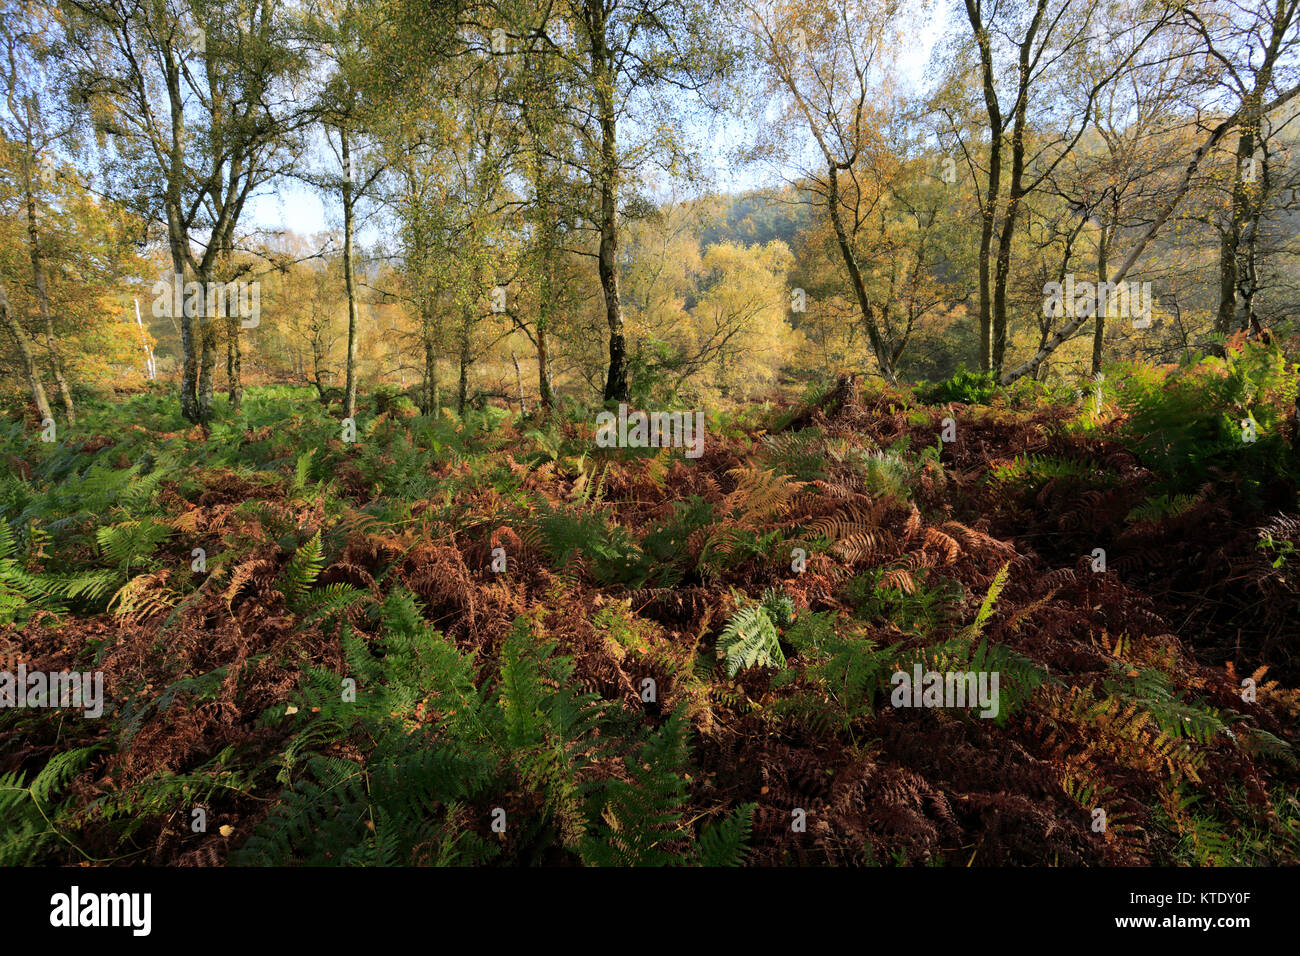 Autumn trees in Cannock Chase Country Park, AONB, Staffordshire, England, UK Stock Photo